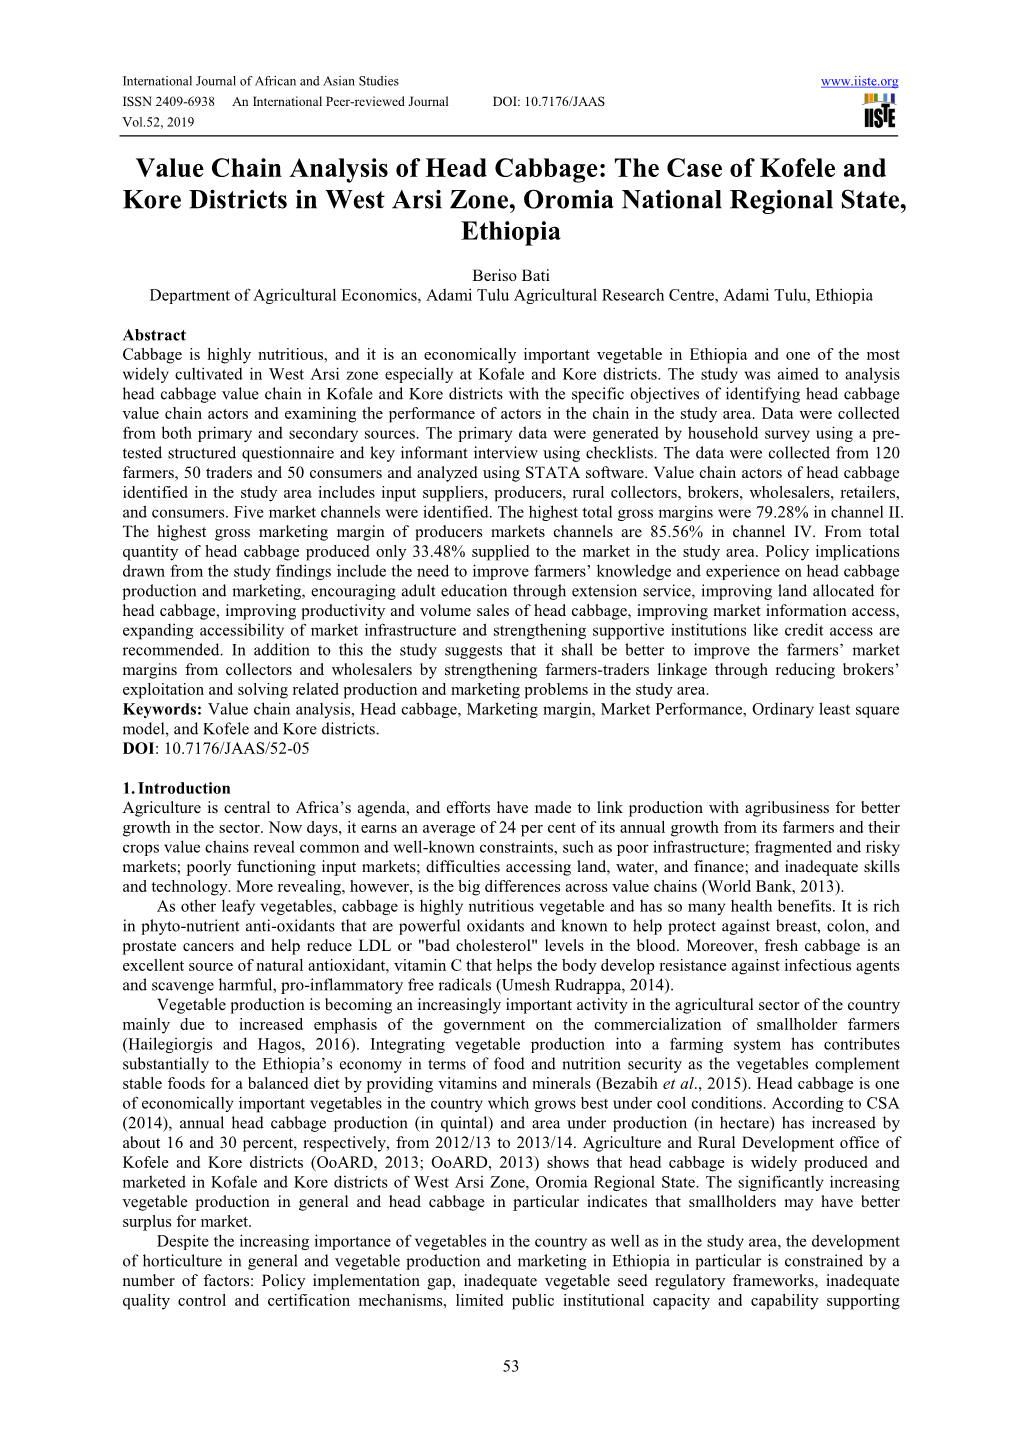 Value Chain Analysis of Head Cabbage: the Case of Kofele and Kore Districts in West Arsi Zone, Oromia National Regional State, Ethiopia